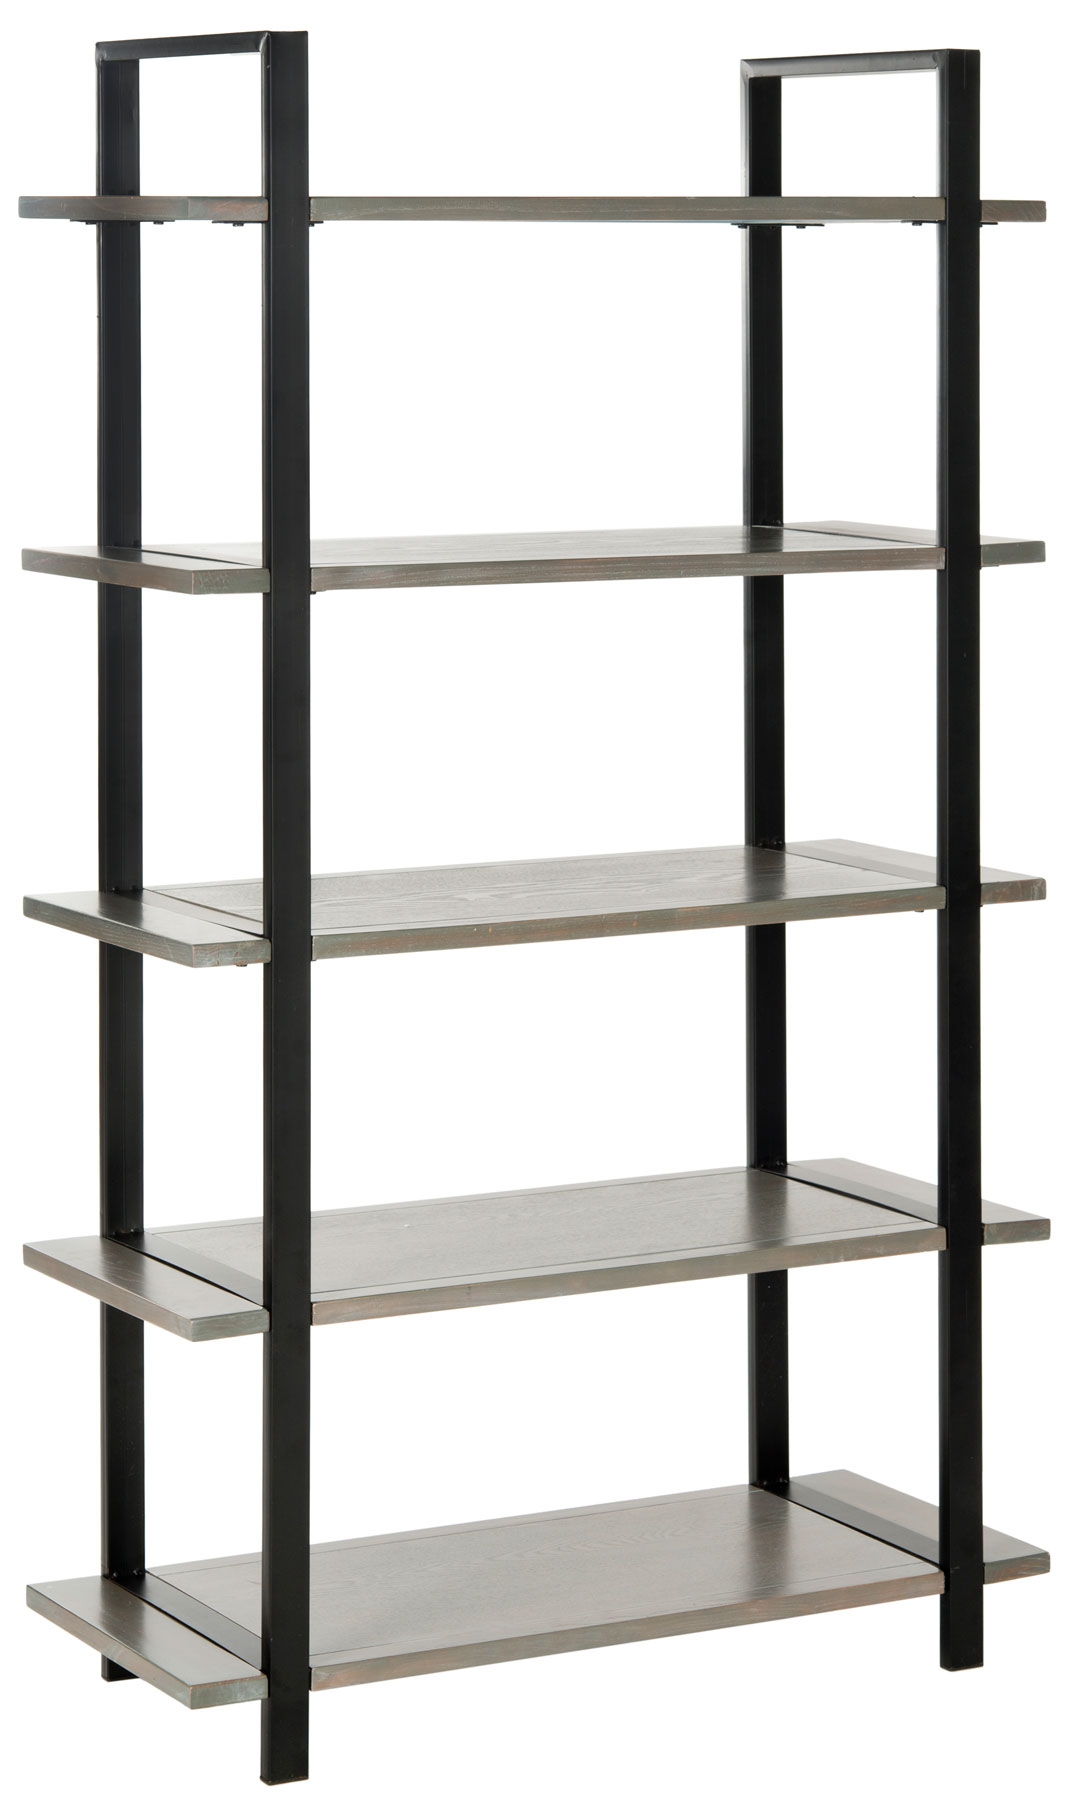 Scott 5 Tier Etagere - French Grey - Arlo Home - Image 1